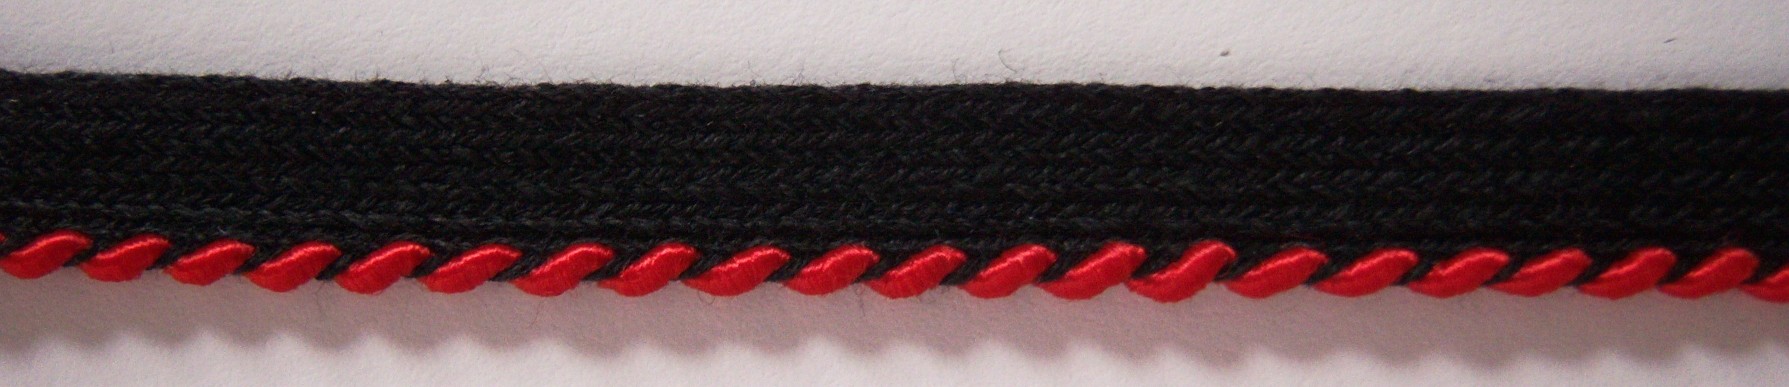 Black/Shiny Red 1/8" Striped Piping